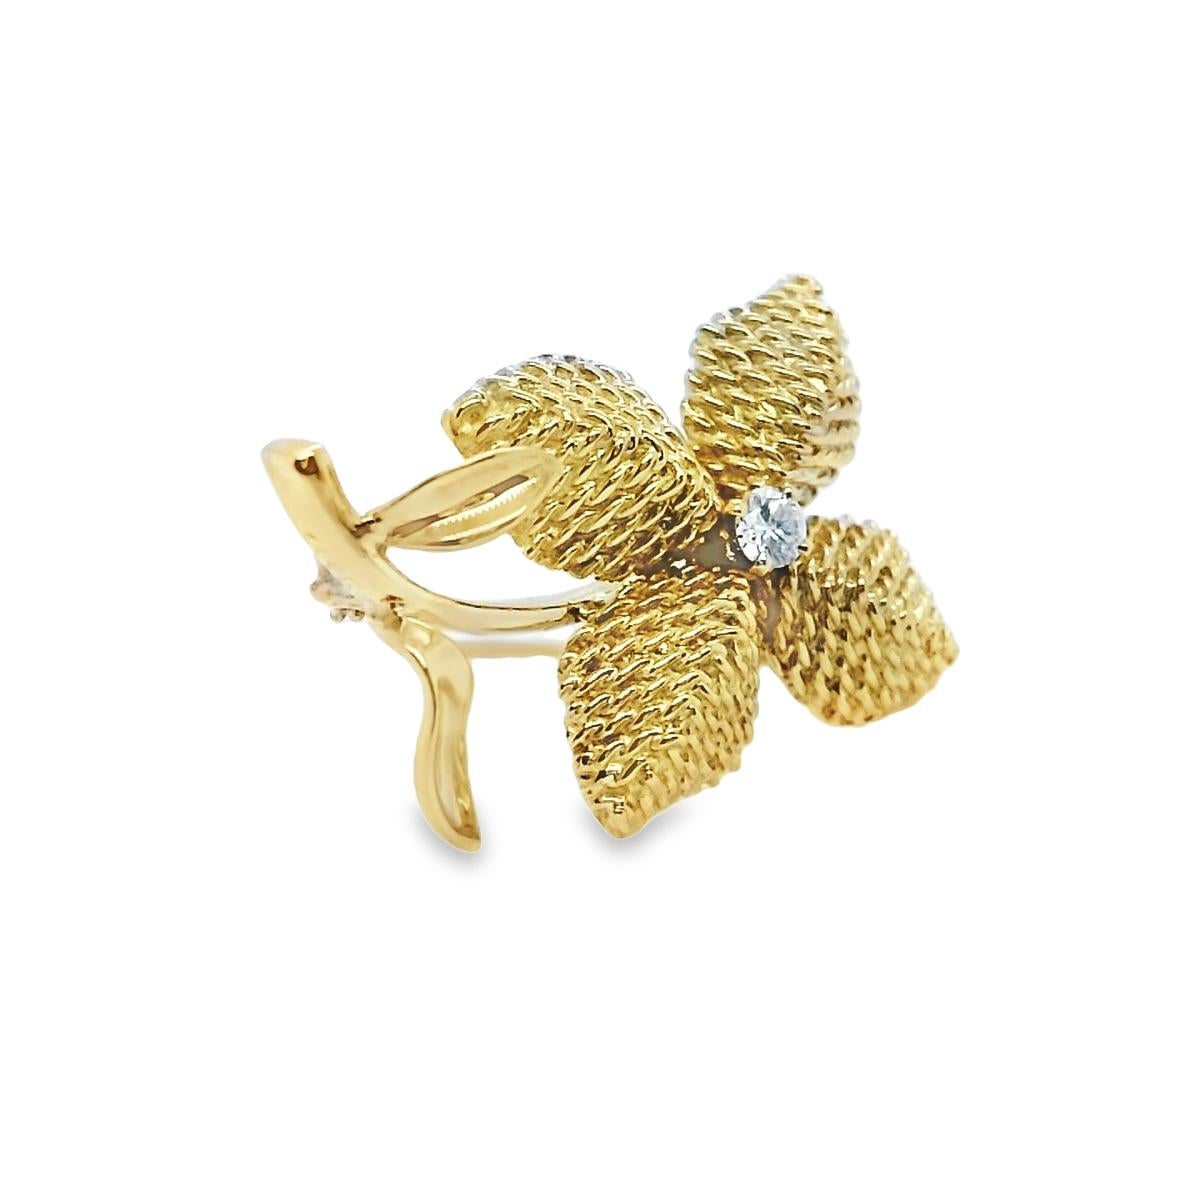 Cartier very rare example of a diamond Brooch. 

Mid-century approx 1950s, depicts a beautiful flower, crafted using traditional carving, and textured work, bringing this beautiful brooch to life. 

Set with a round-brilliant cut diamond approx